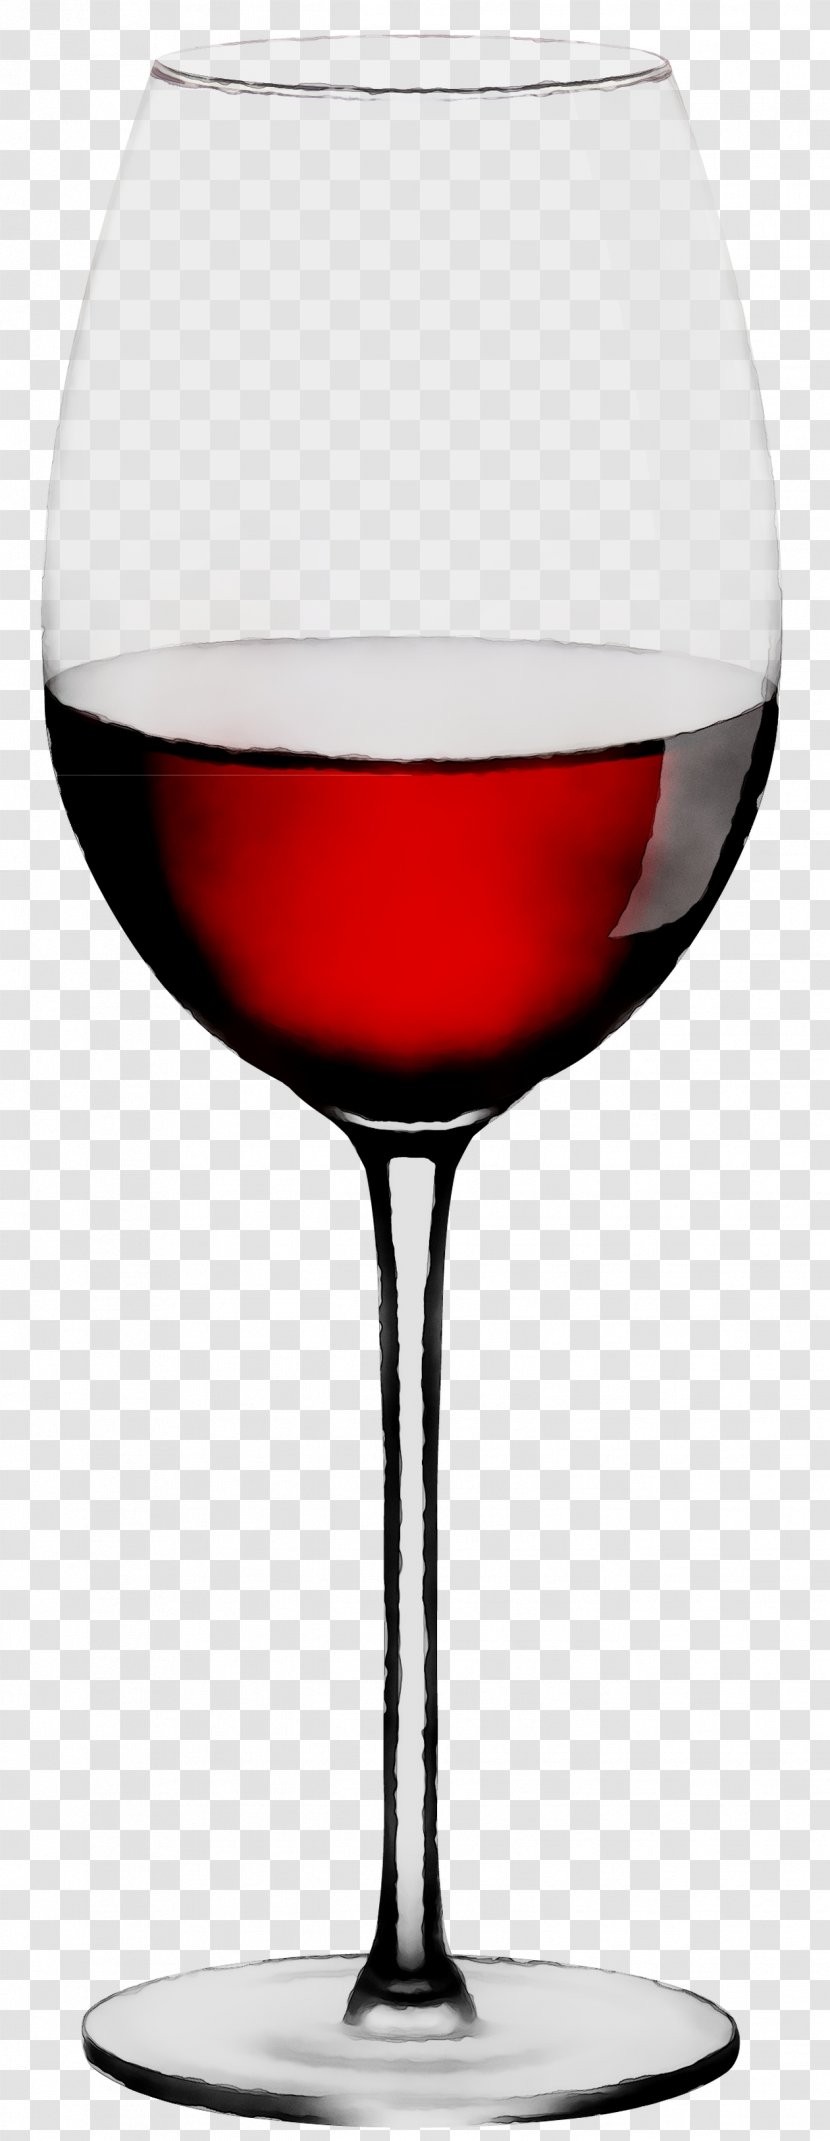 Wine Glass Red White Mulled - Tableware Transparent PNG